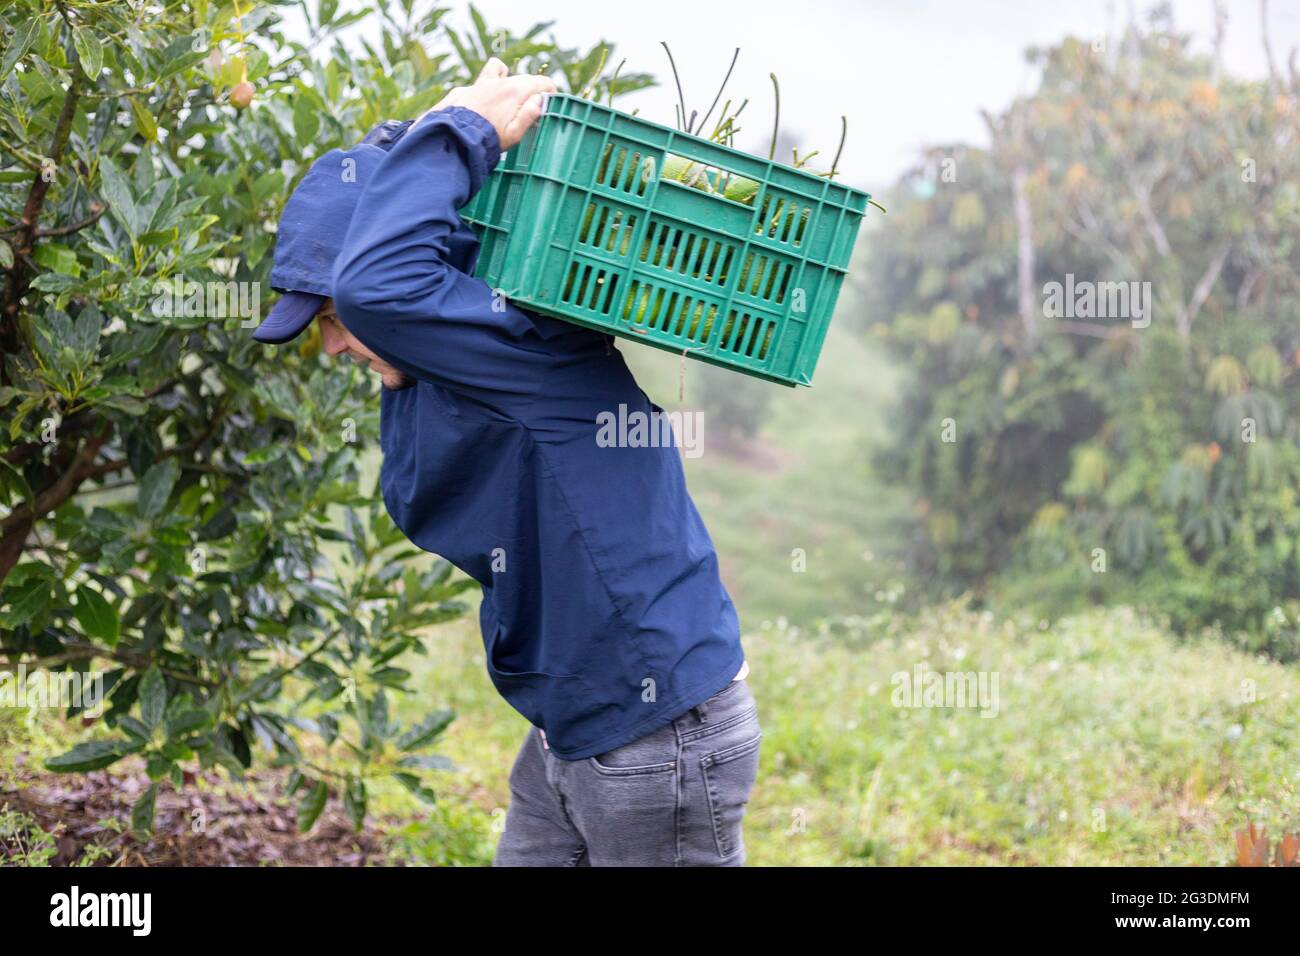 young farmer carrying a basket full of freshly harvested avocados Stock Photo